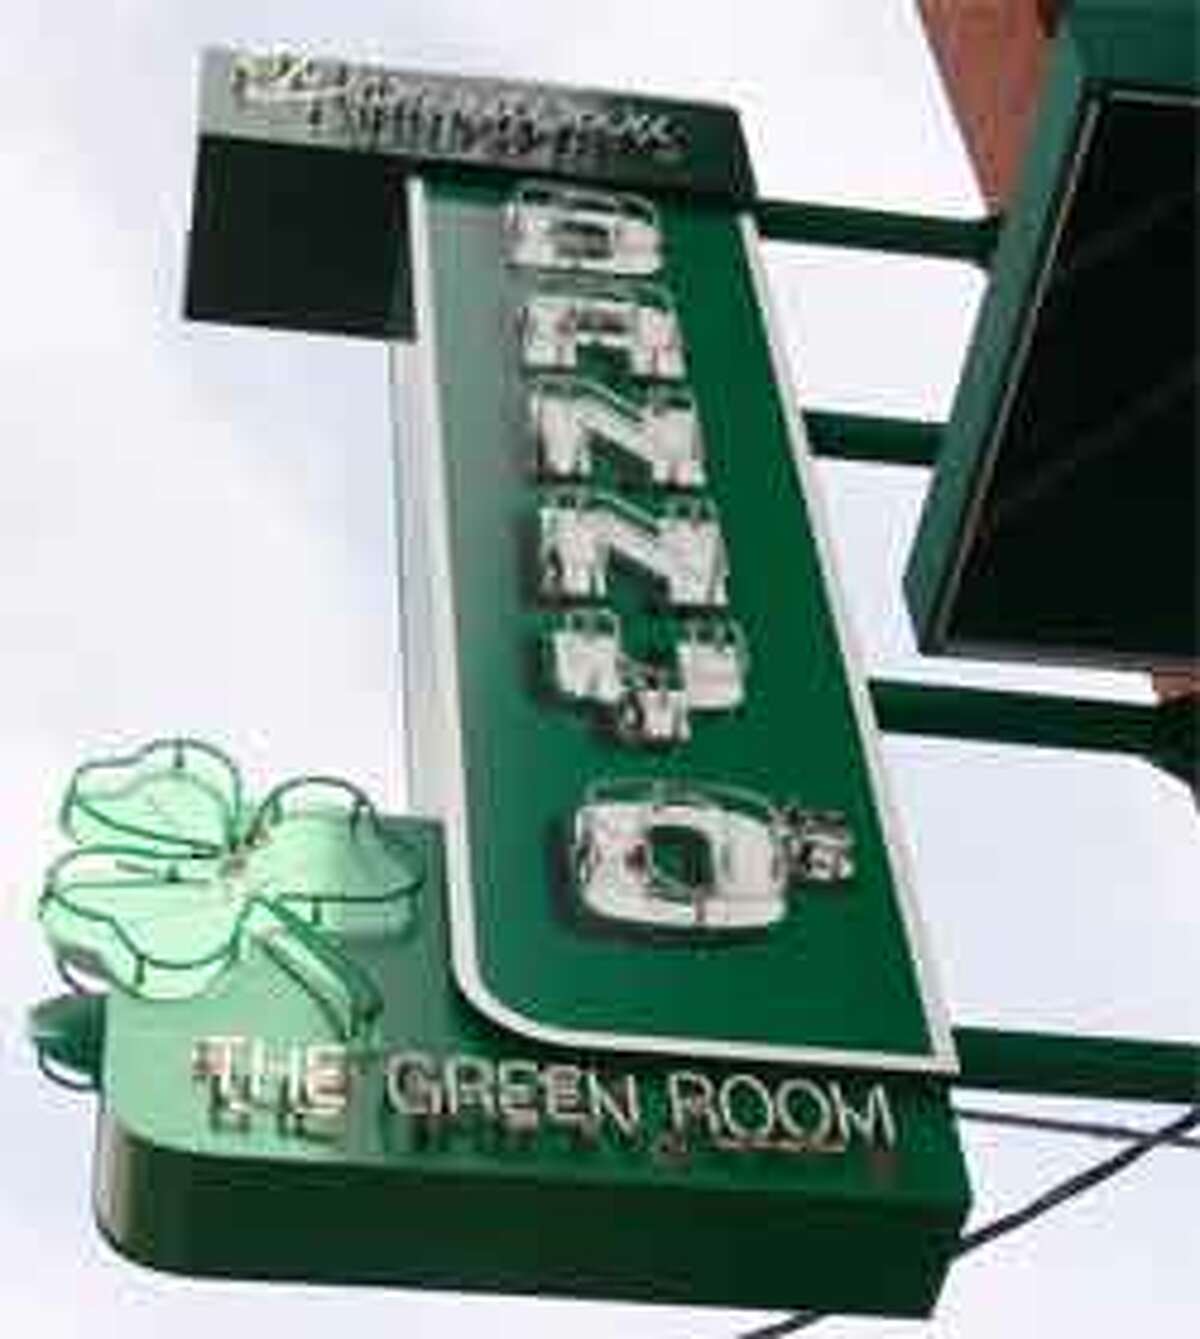 The landmark marquee sign at Downtown Danny O’s, with its shamrock.